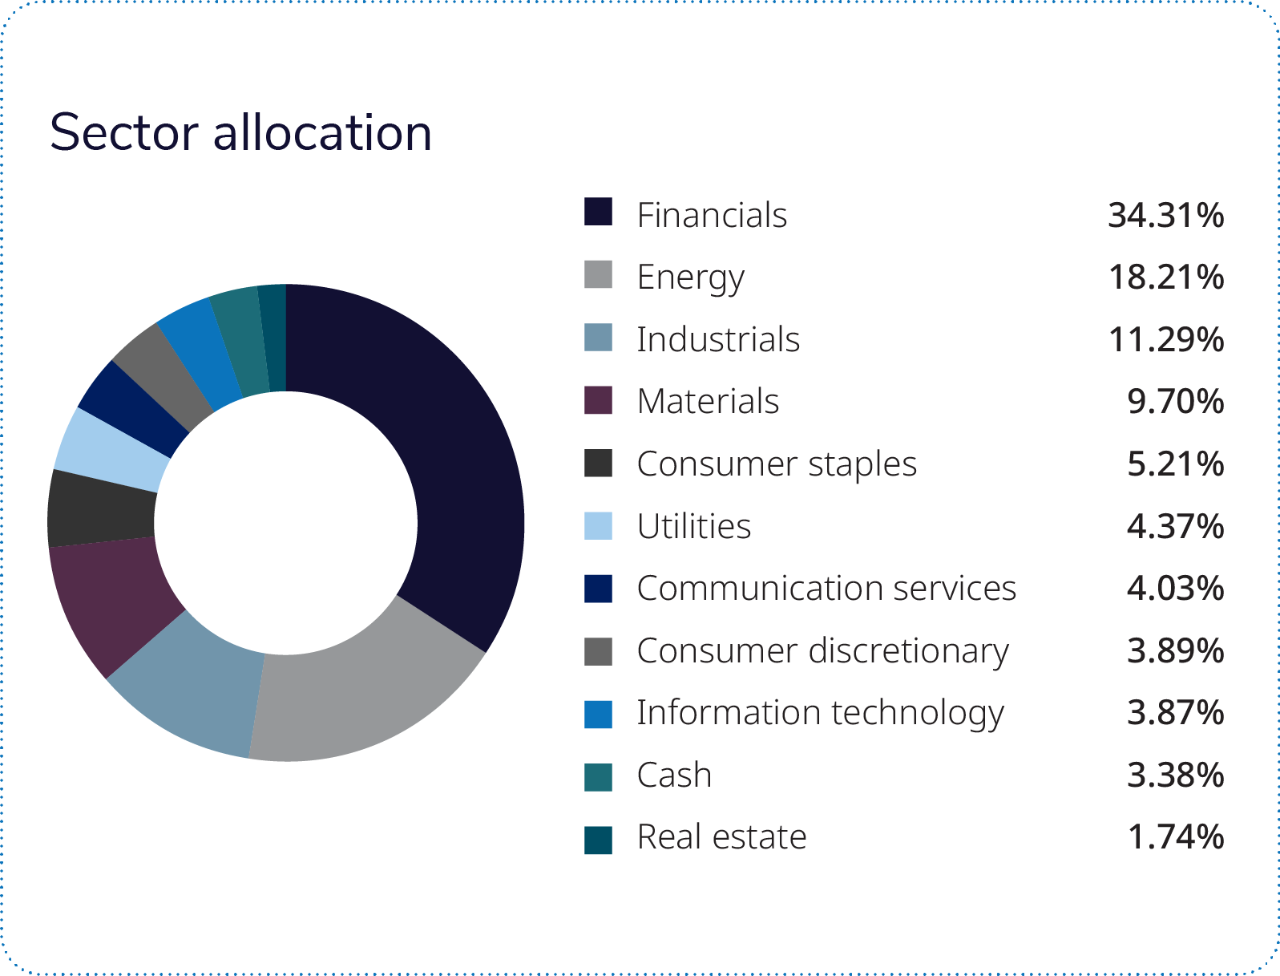 Almost three-quarters of the fund is comprised of four sectors: financials, energy, industrials and materials. 